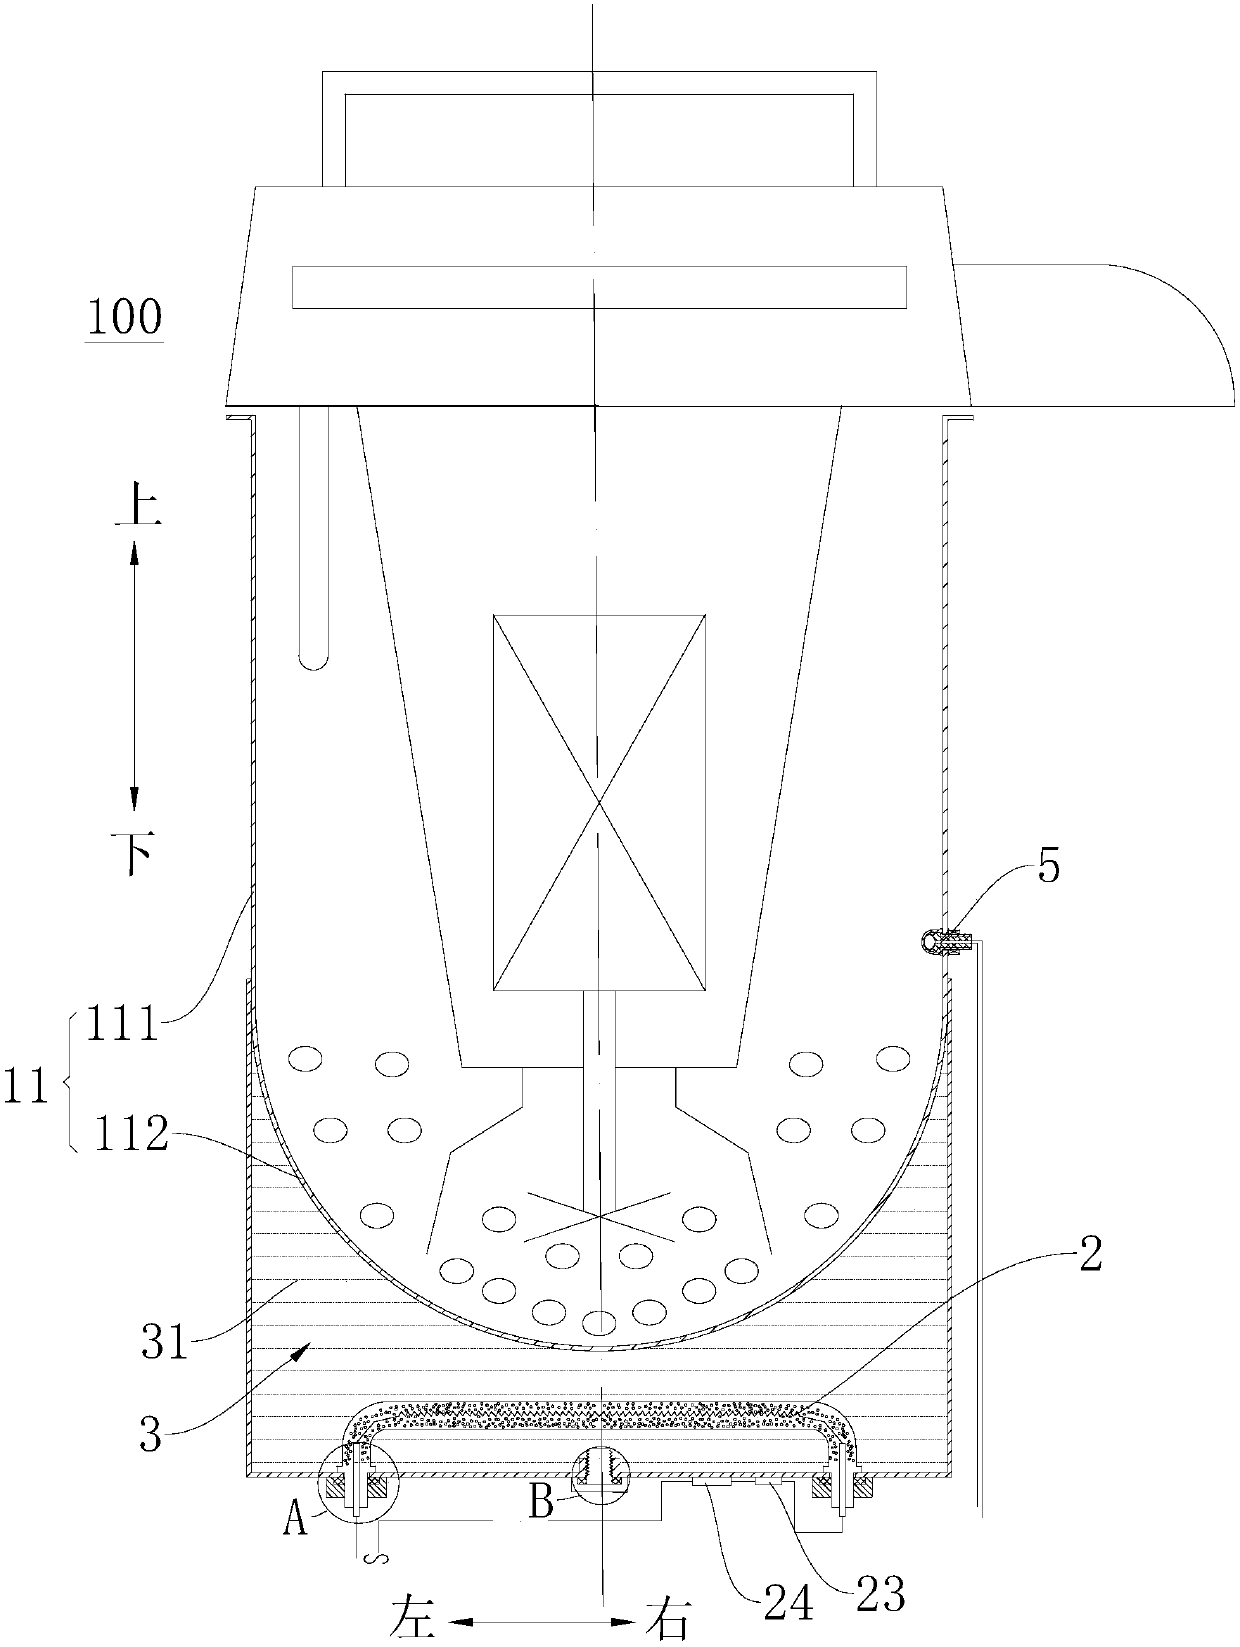 Heating container of food processor and food processor with same